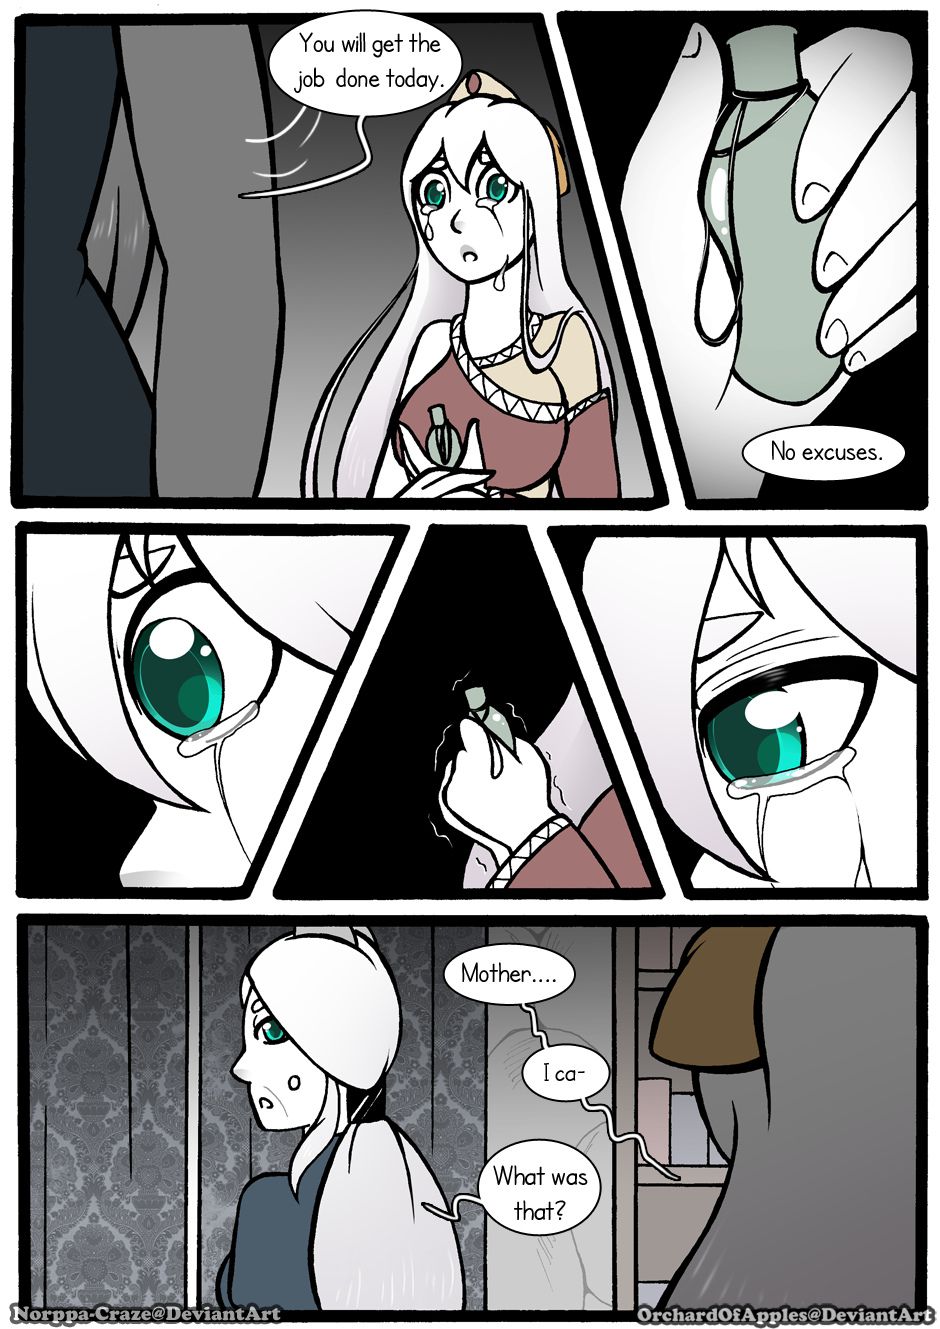 [Jeny-jen94] Between Kings and Queens [Ongoing] 276